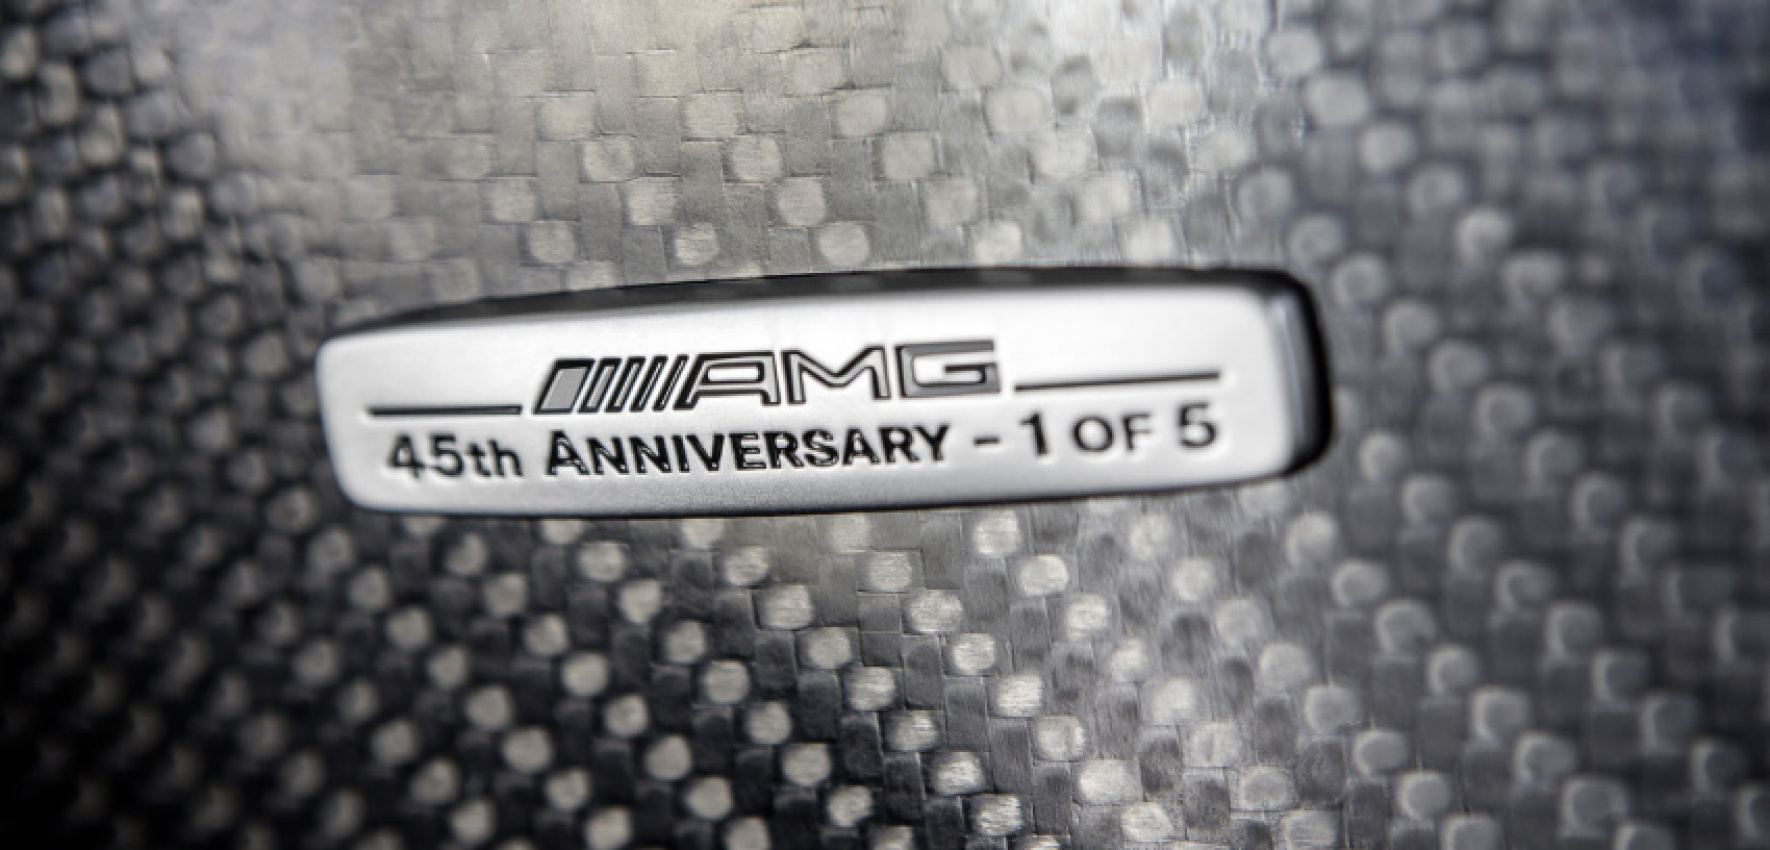 autos, cars, mercedes-benz, mg, review, 2010s cars, amg, amg model in depth, mercedes, mercedes amg, mercedes race car in depth, mercedes-benz model in depth, 2012 mercedes-benz sls amg gt3 “45th anniversary”